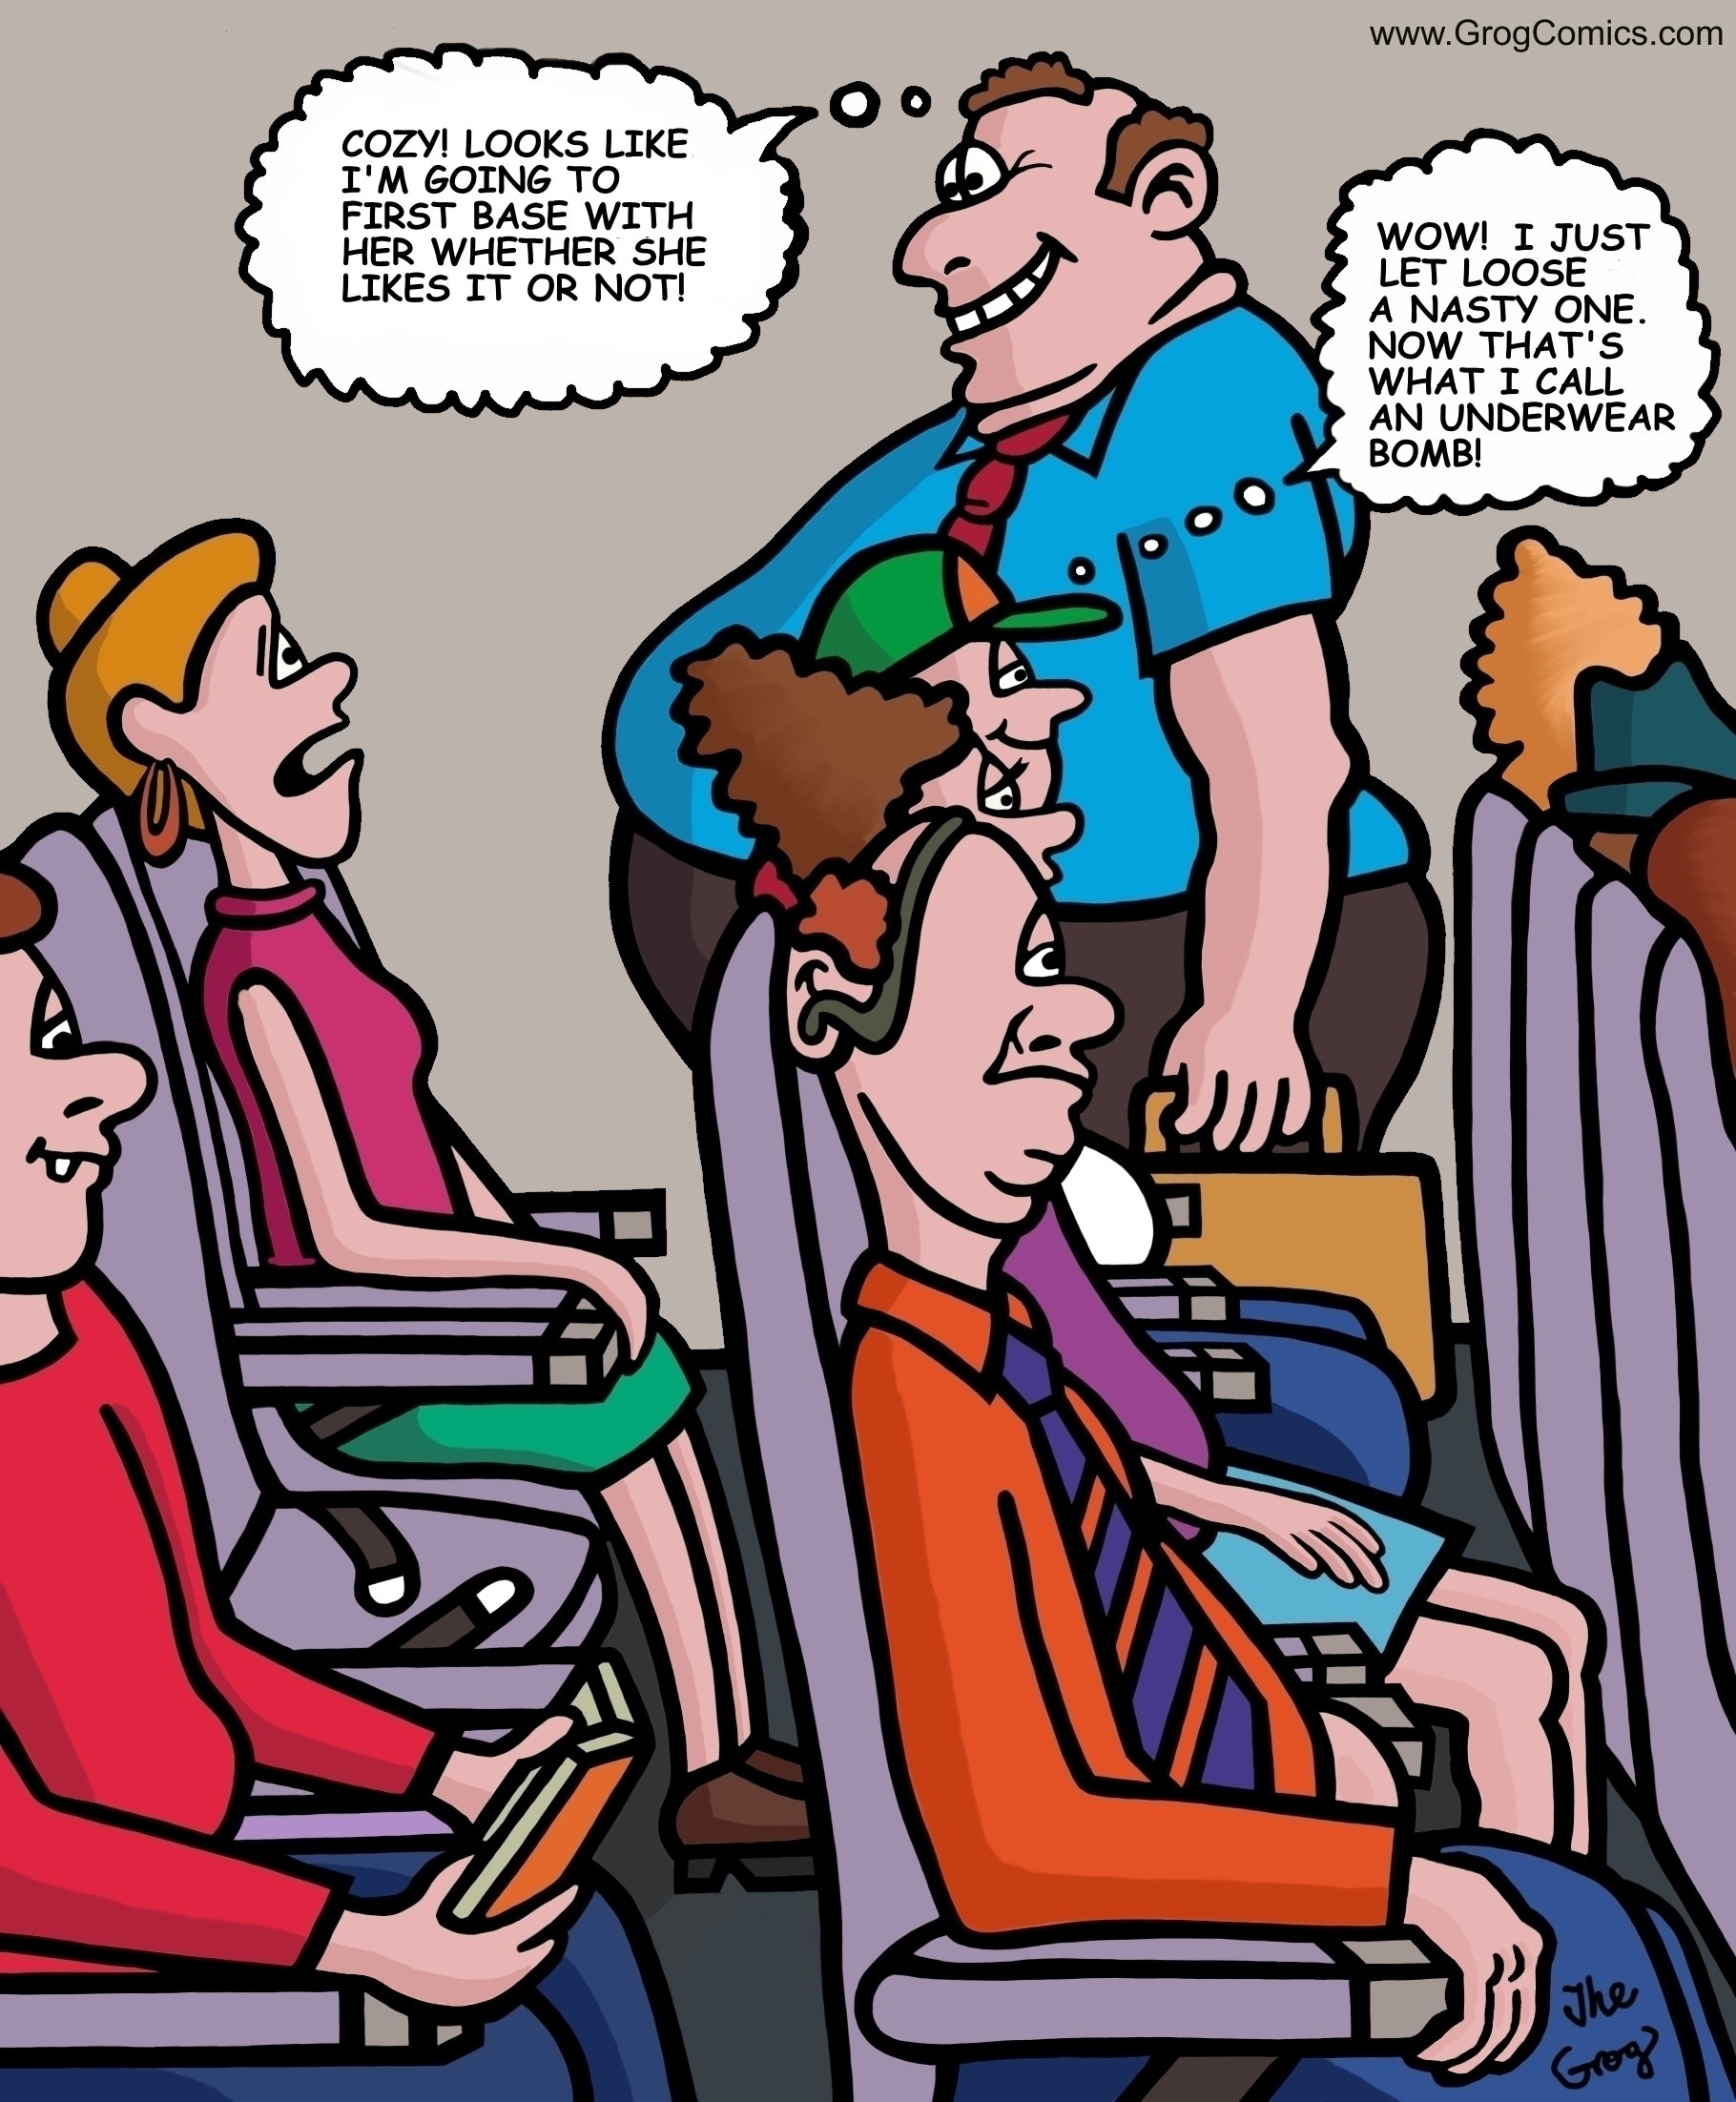 A woman, sitting in the aisle seat of a commercial jet airliner, watches an extremely obese man walking down the aisle. As he gains eye contact with her, the woman suddenly realizes that the man will be sitting next to her. She has a look of horror on her face. The man, on the other hand, says to himself, “Cozy! Looks like I’m going to first base with her whether she likes it or not!” Meanwhile, the guy sitting in the row in front of the woman, lets loose a silent but deadly fart. He says to himself, “Wow! I just let loose a nasty one! Now that’s what I call an underwear bomb.”